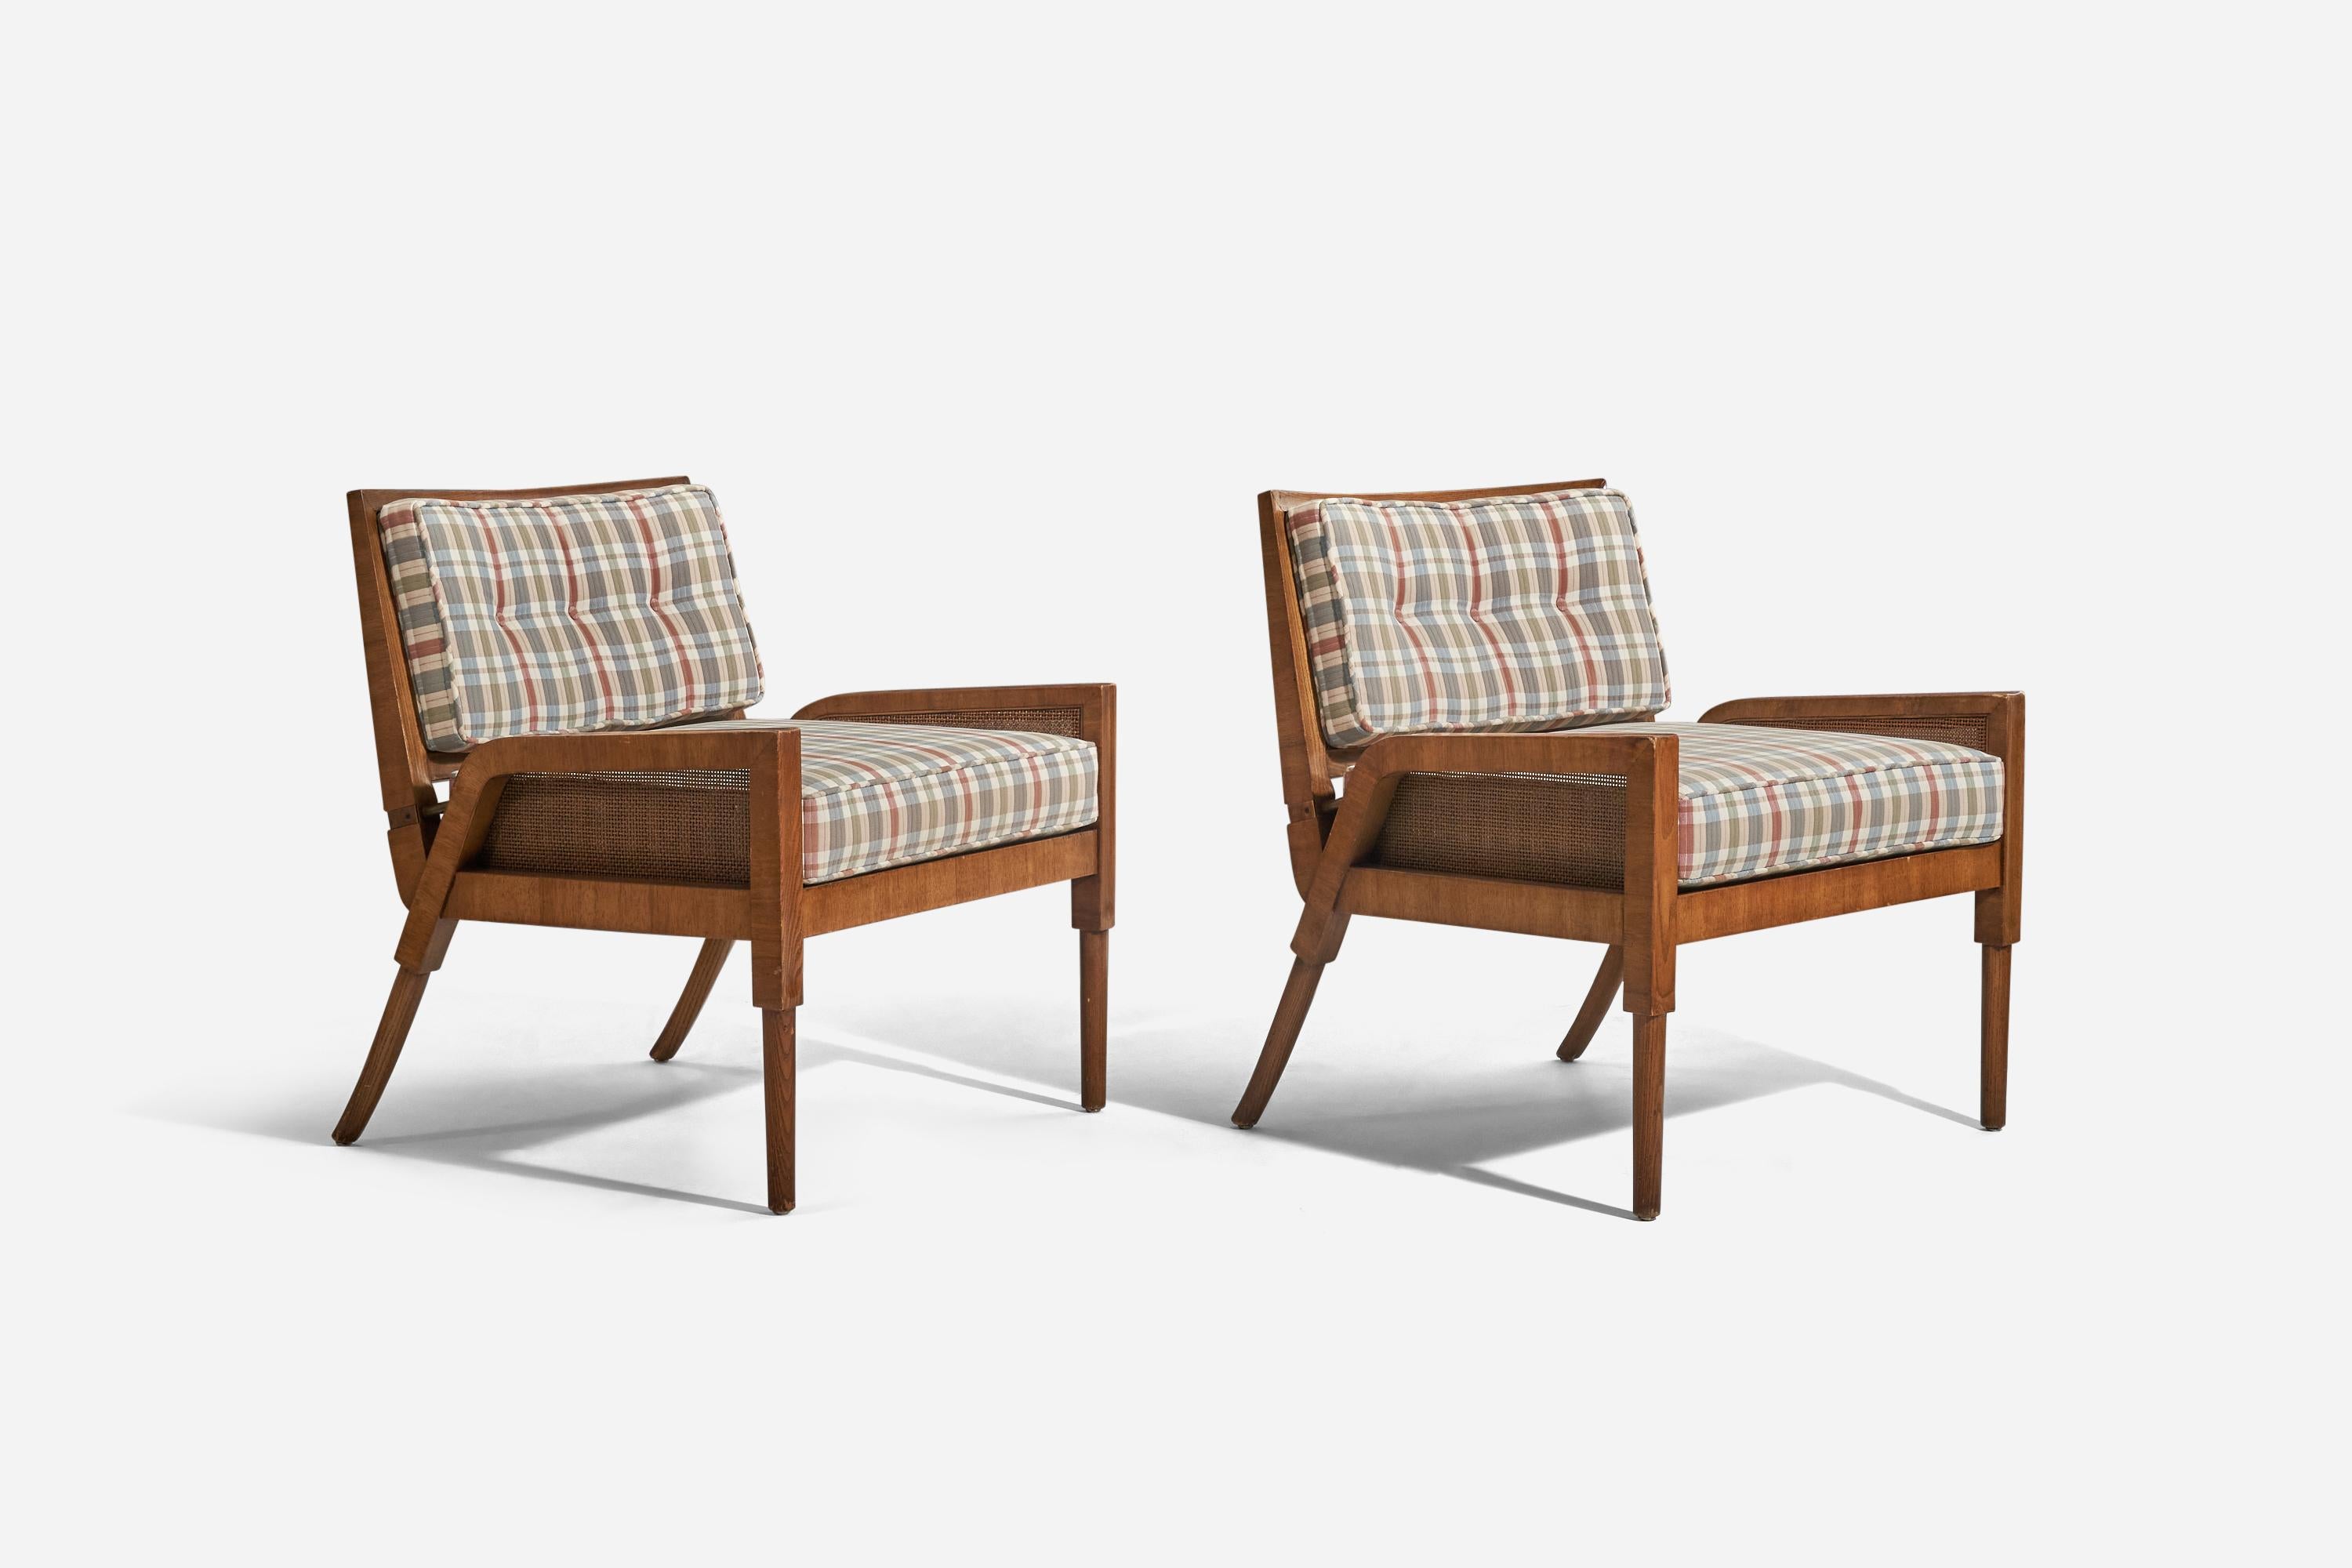 A pair of oak, fabric and cane lounge chairs designed and produced by an American designer, United States, 1950s.




